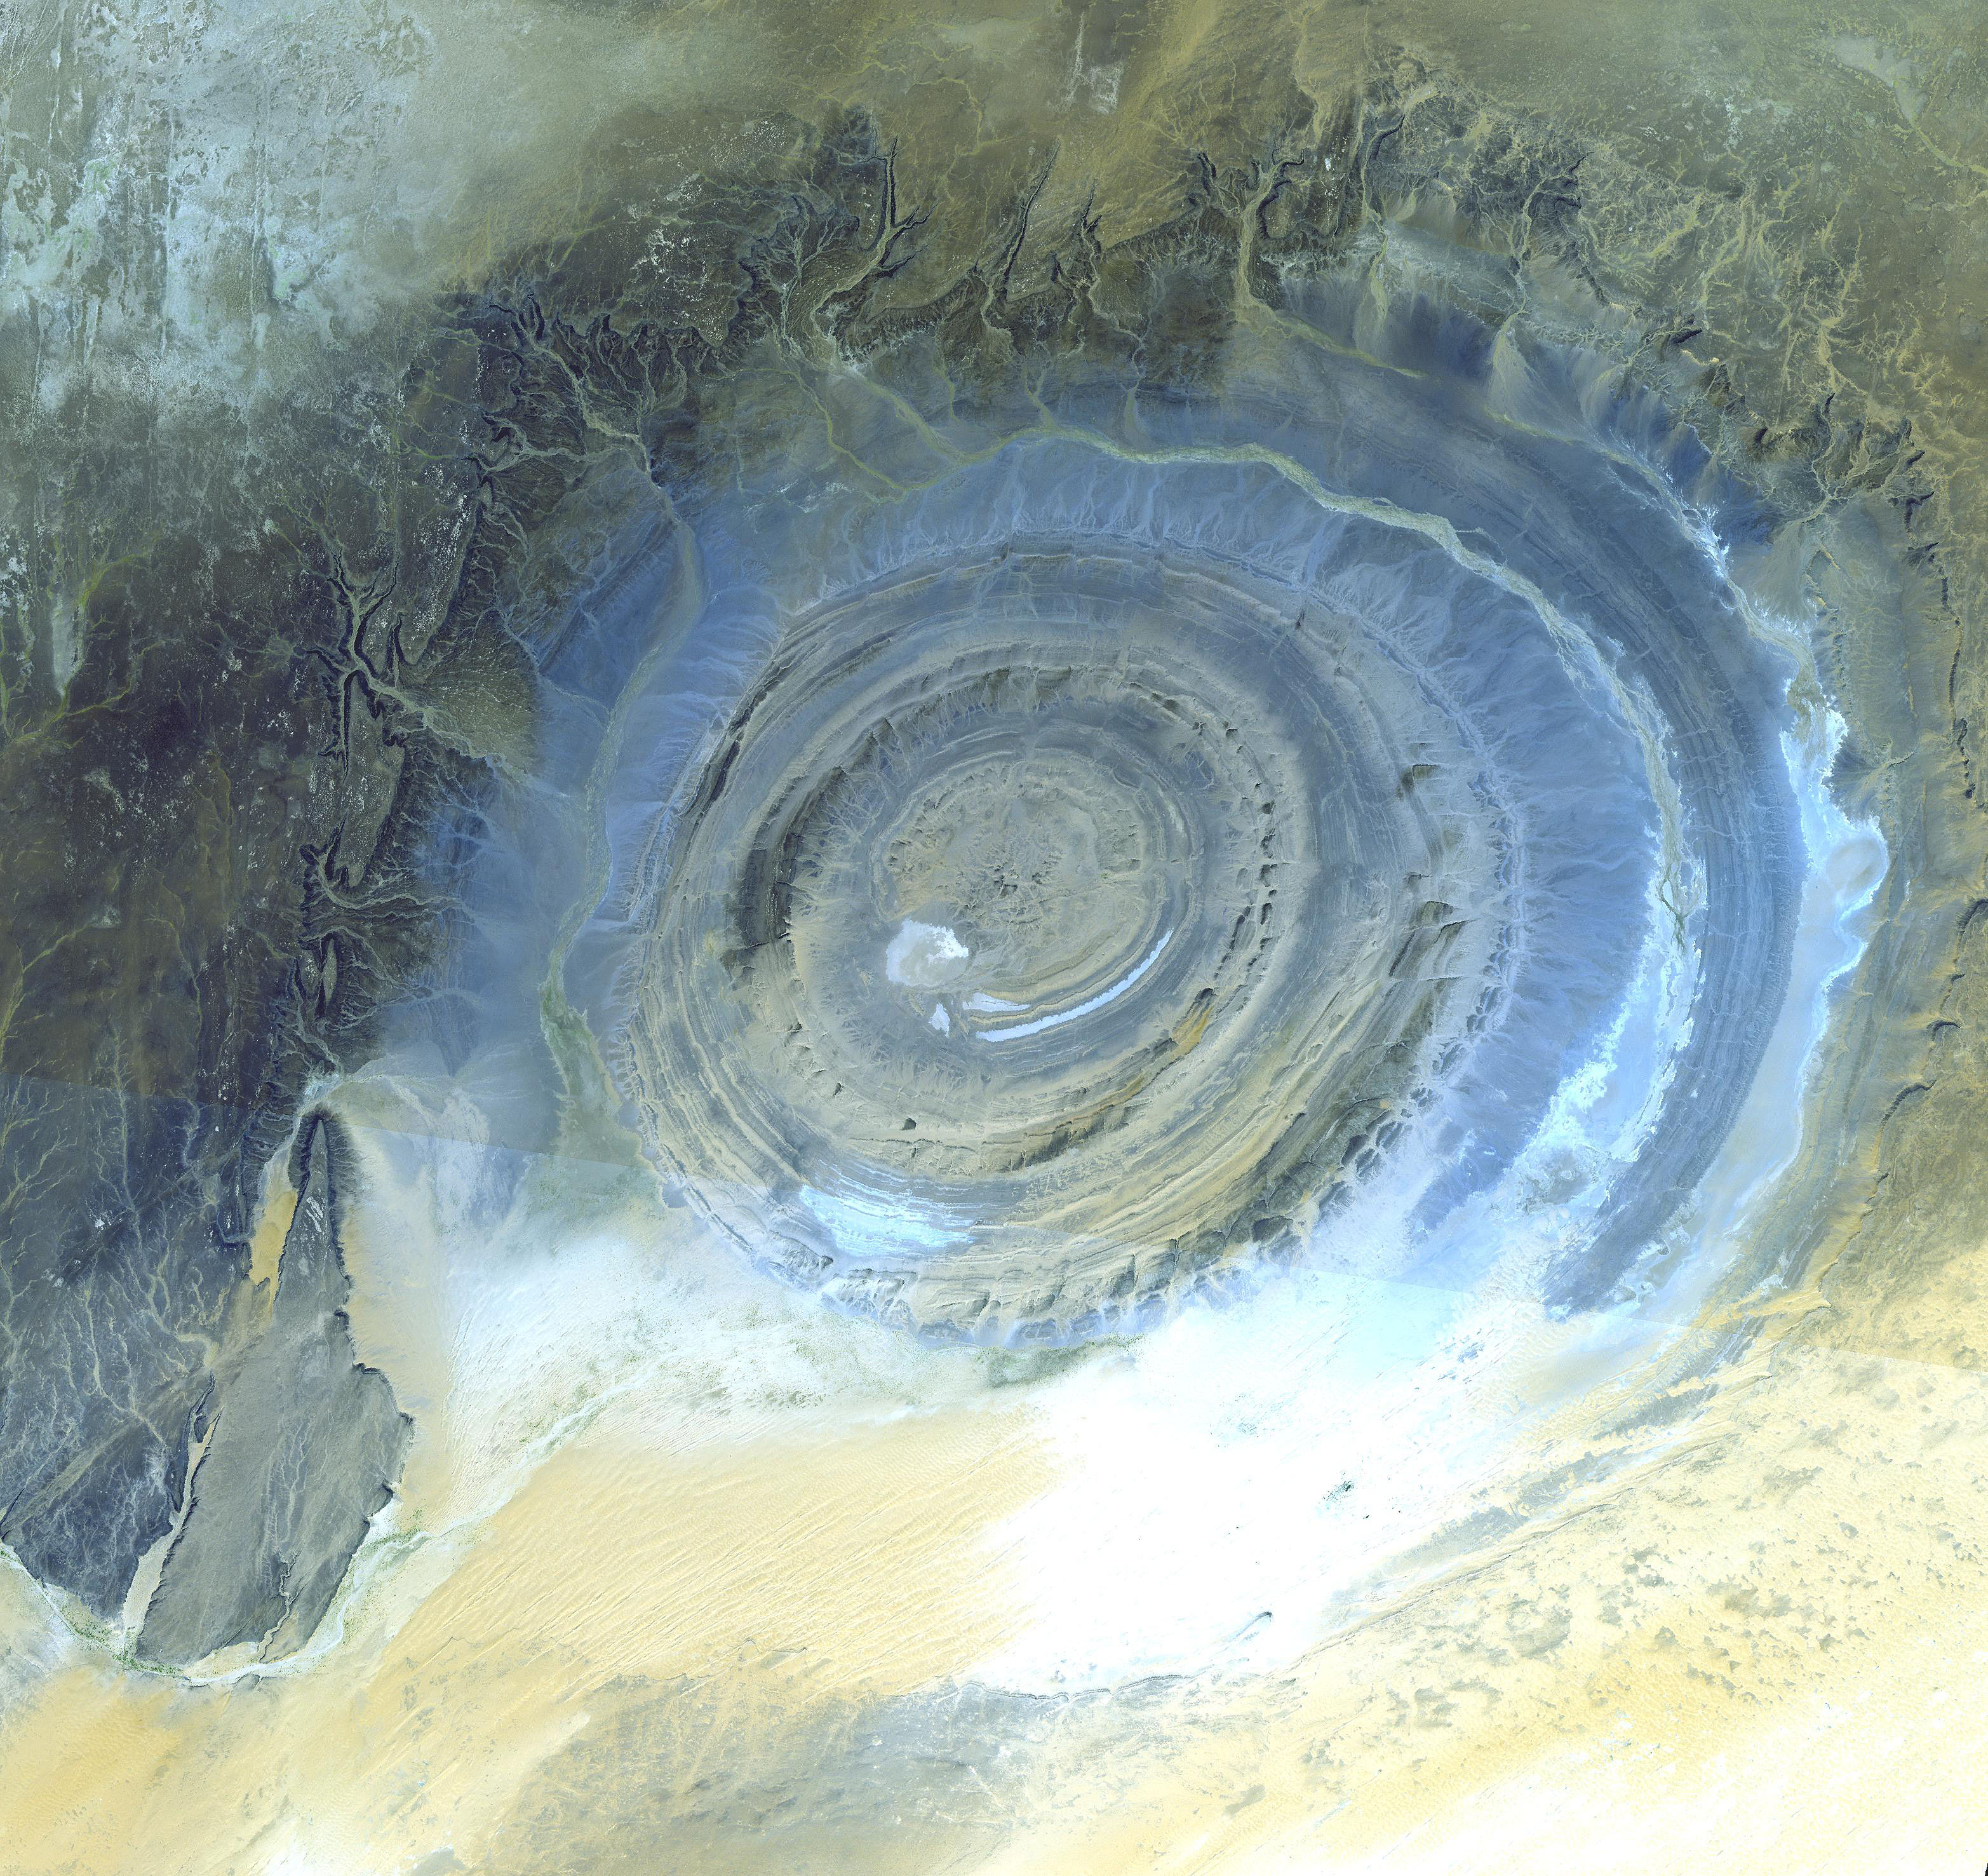 APOD: 2013 May 19 - Earths Richat Structure